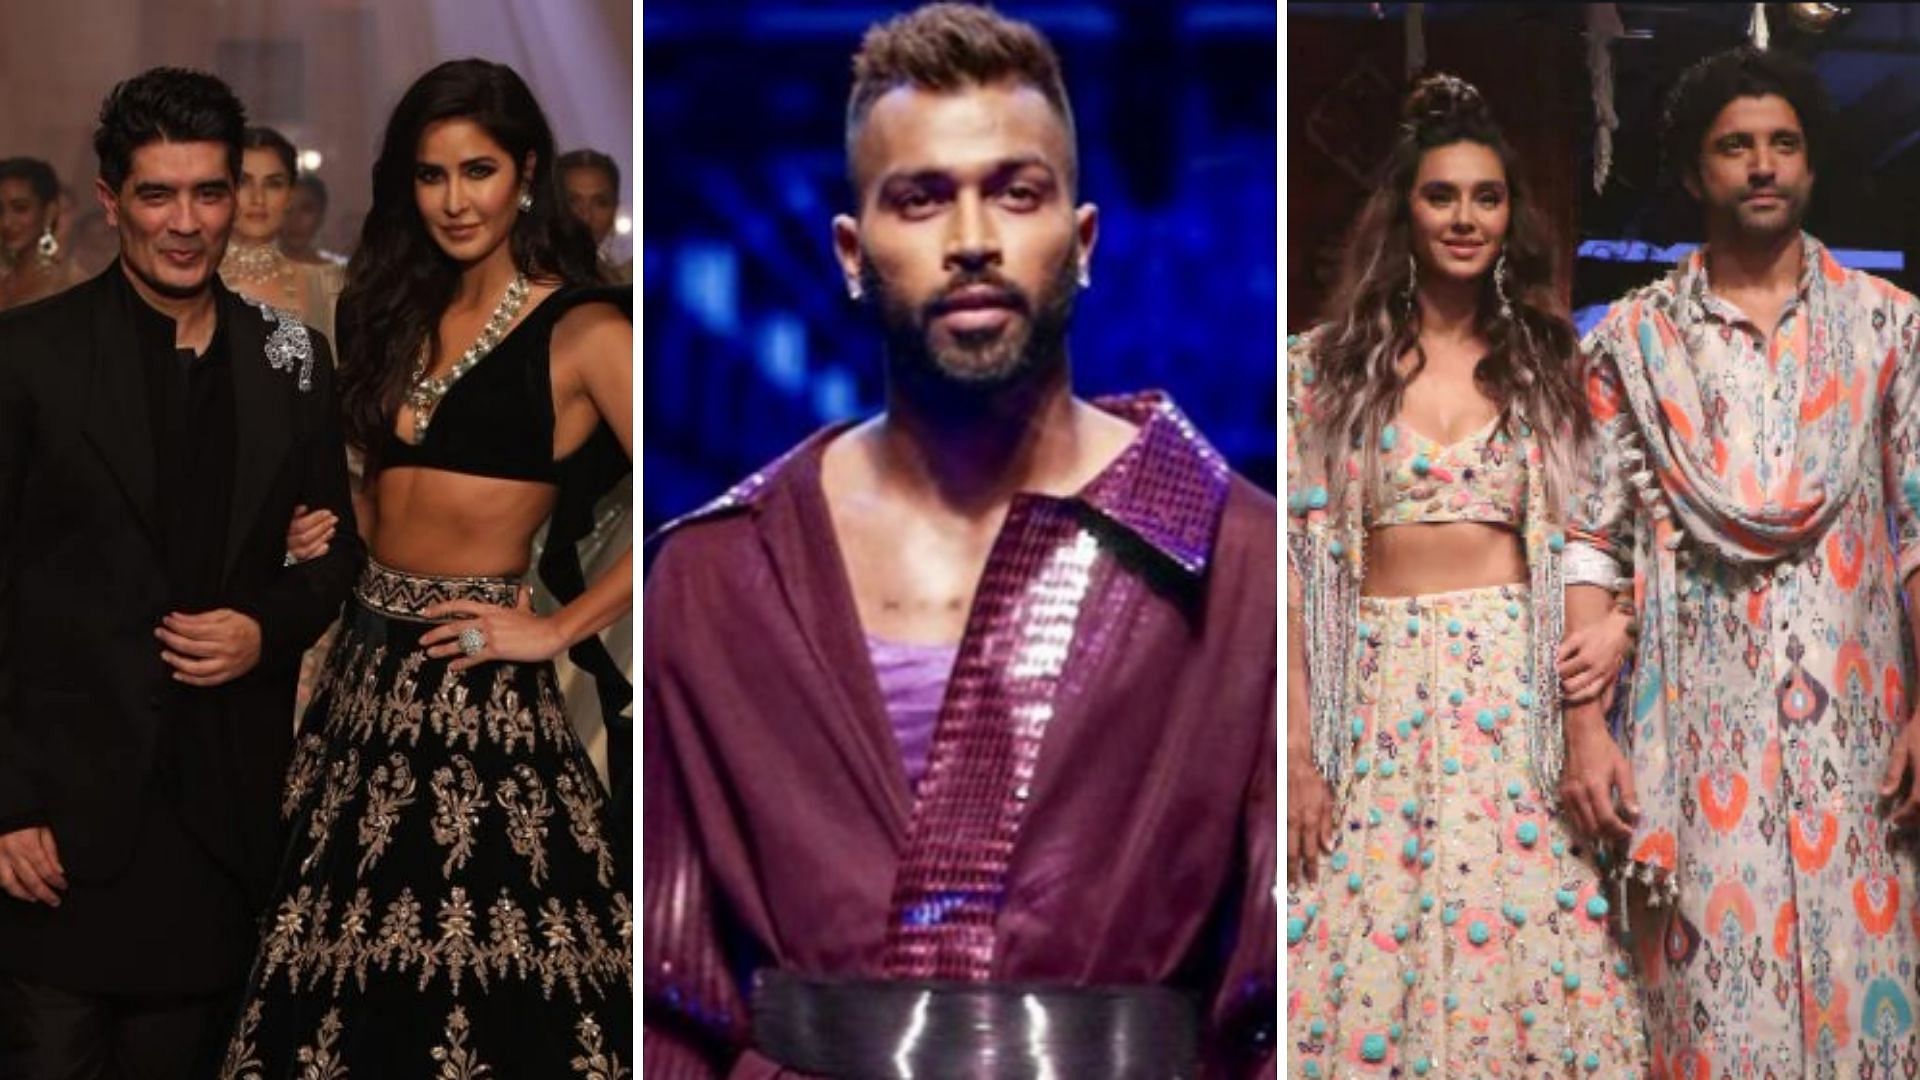 Lakme Fashion Week:&nbsp;From stylists to music producers, it take a village to put together a glamorous fashion show.&nbsp;